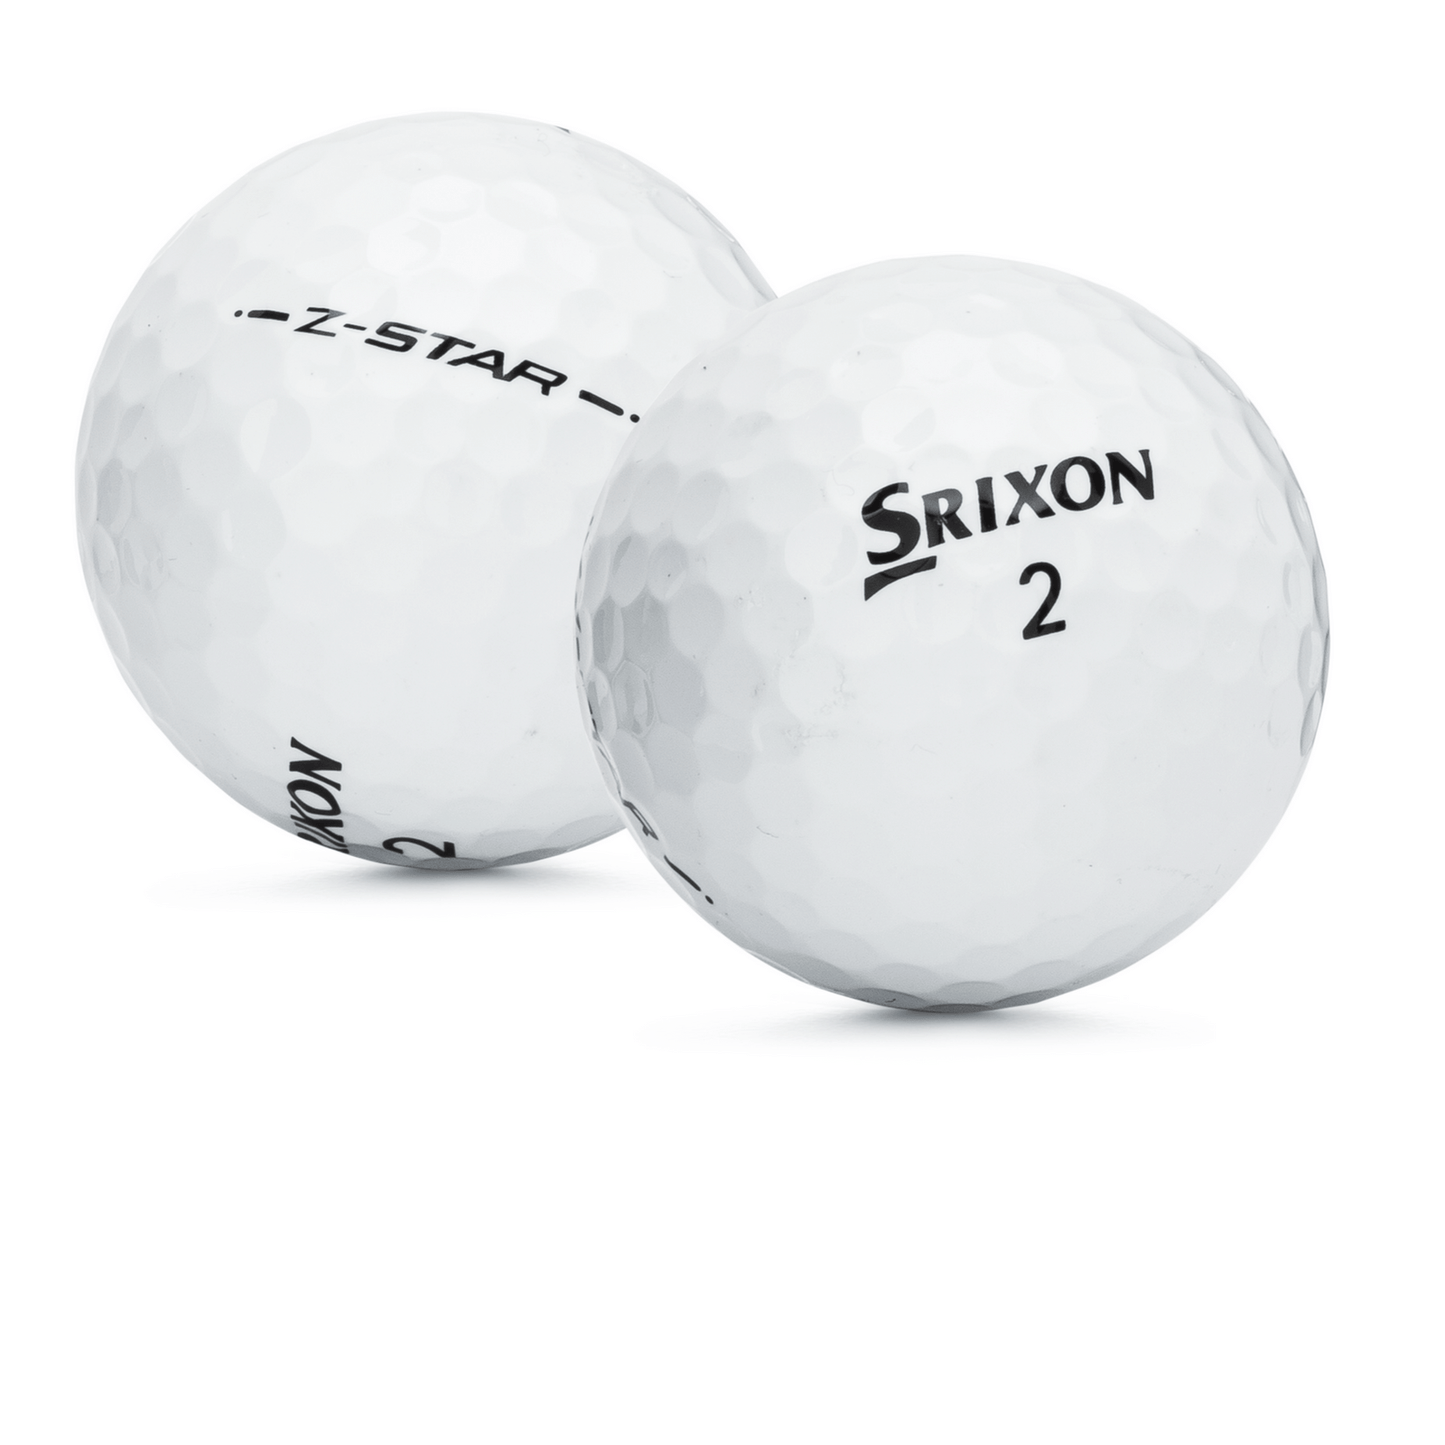 Srixon Assorted Z Series Pro Tour Models Near Mint Recycled Used Golf Balls, White - 60 Count